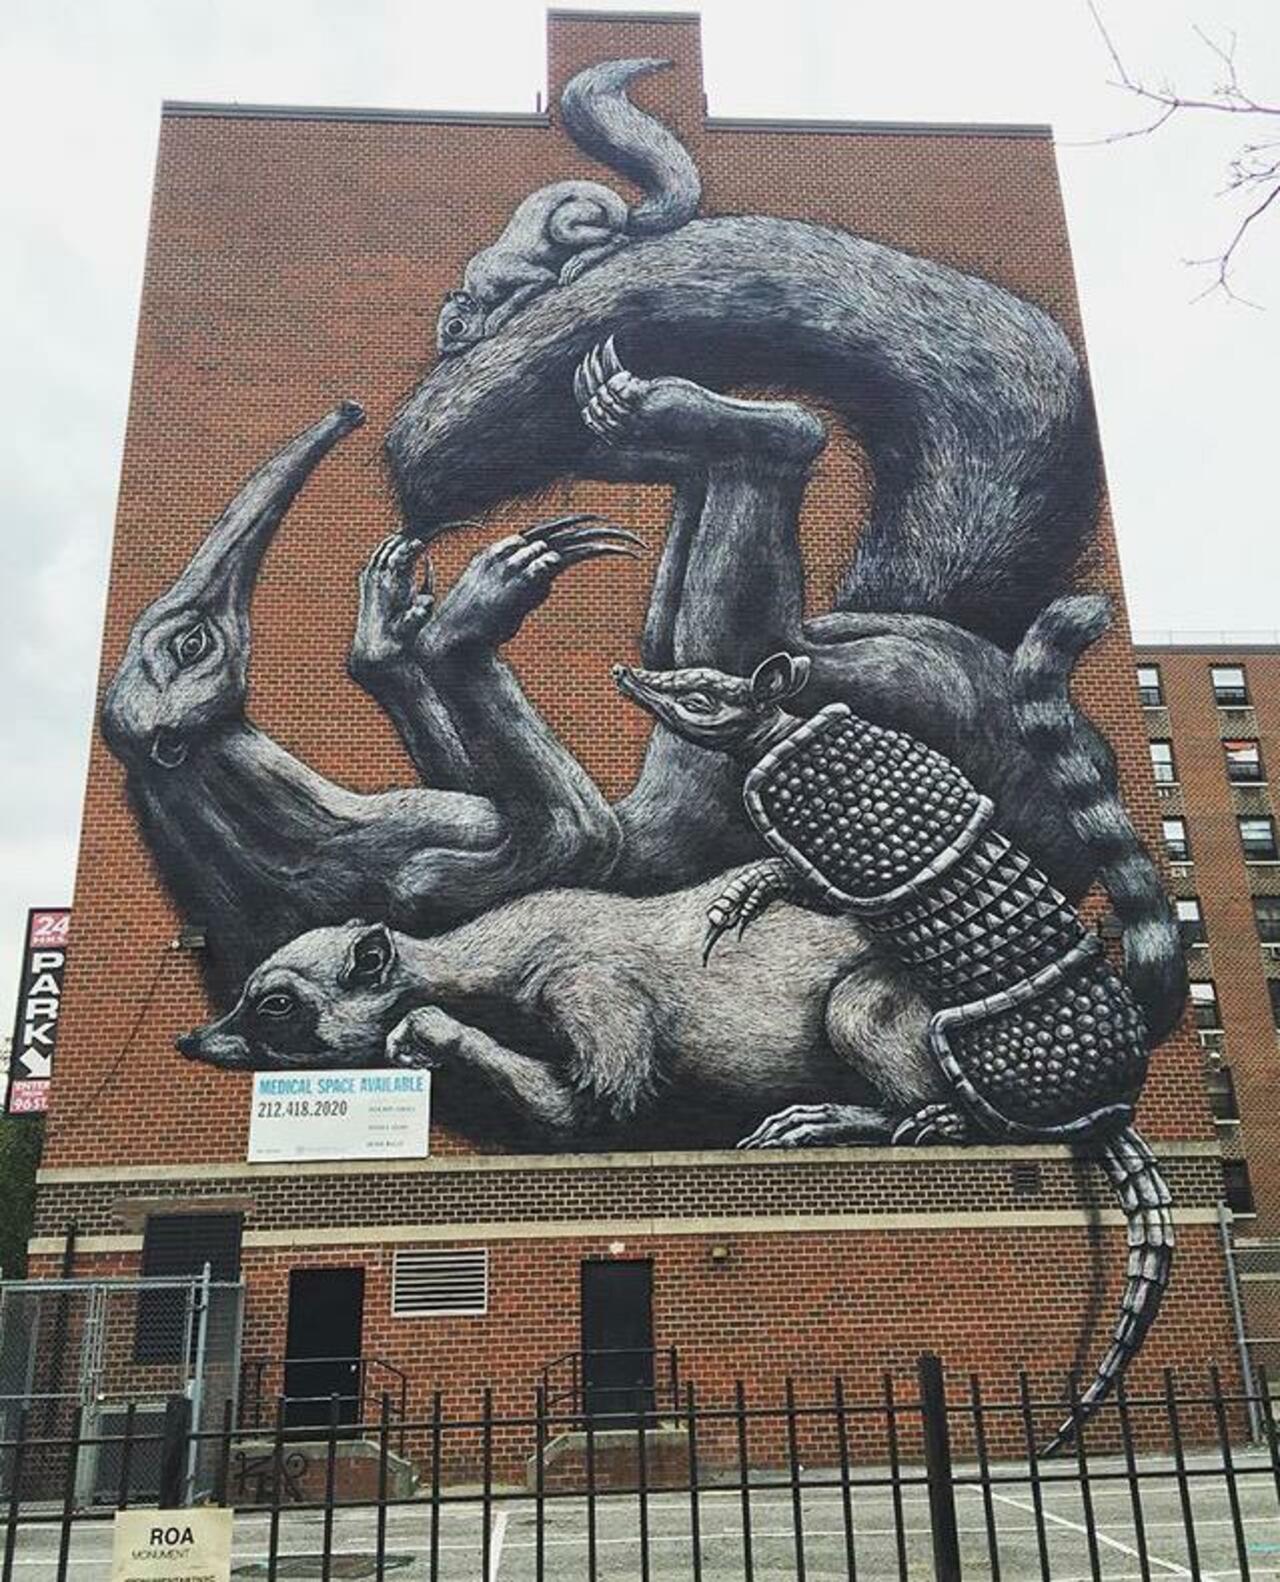 The completed new large scale Street Art wall by ROA in NYC

#art #graffiti #mural #streetart http://t.co/LODk54sPOb